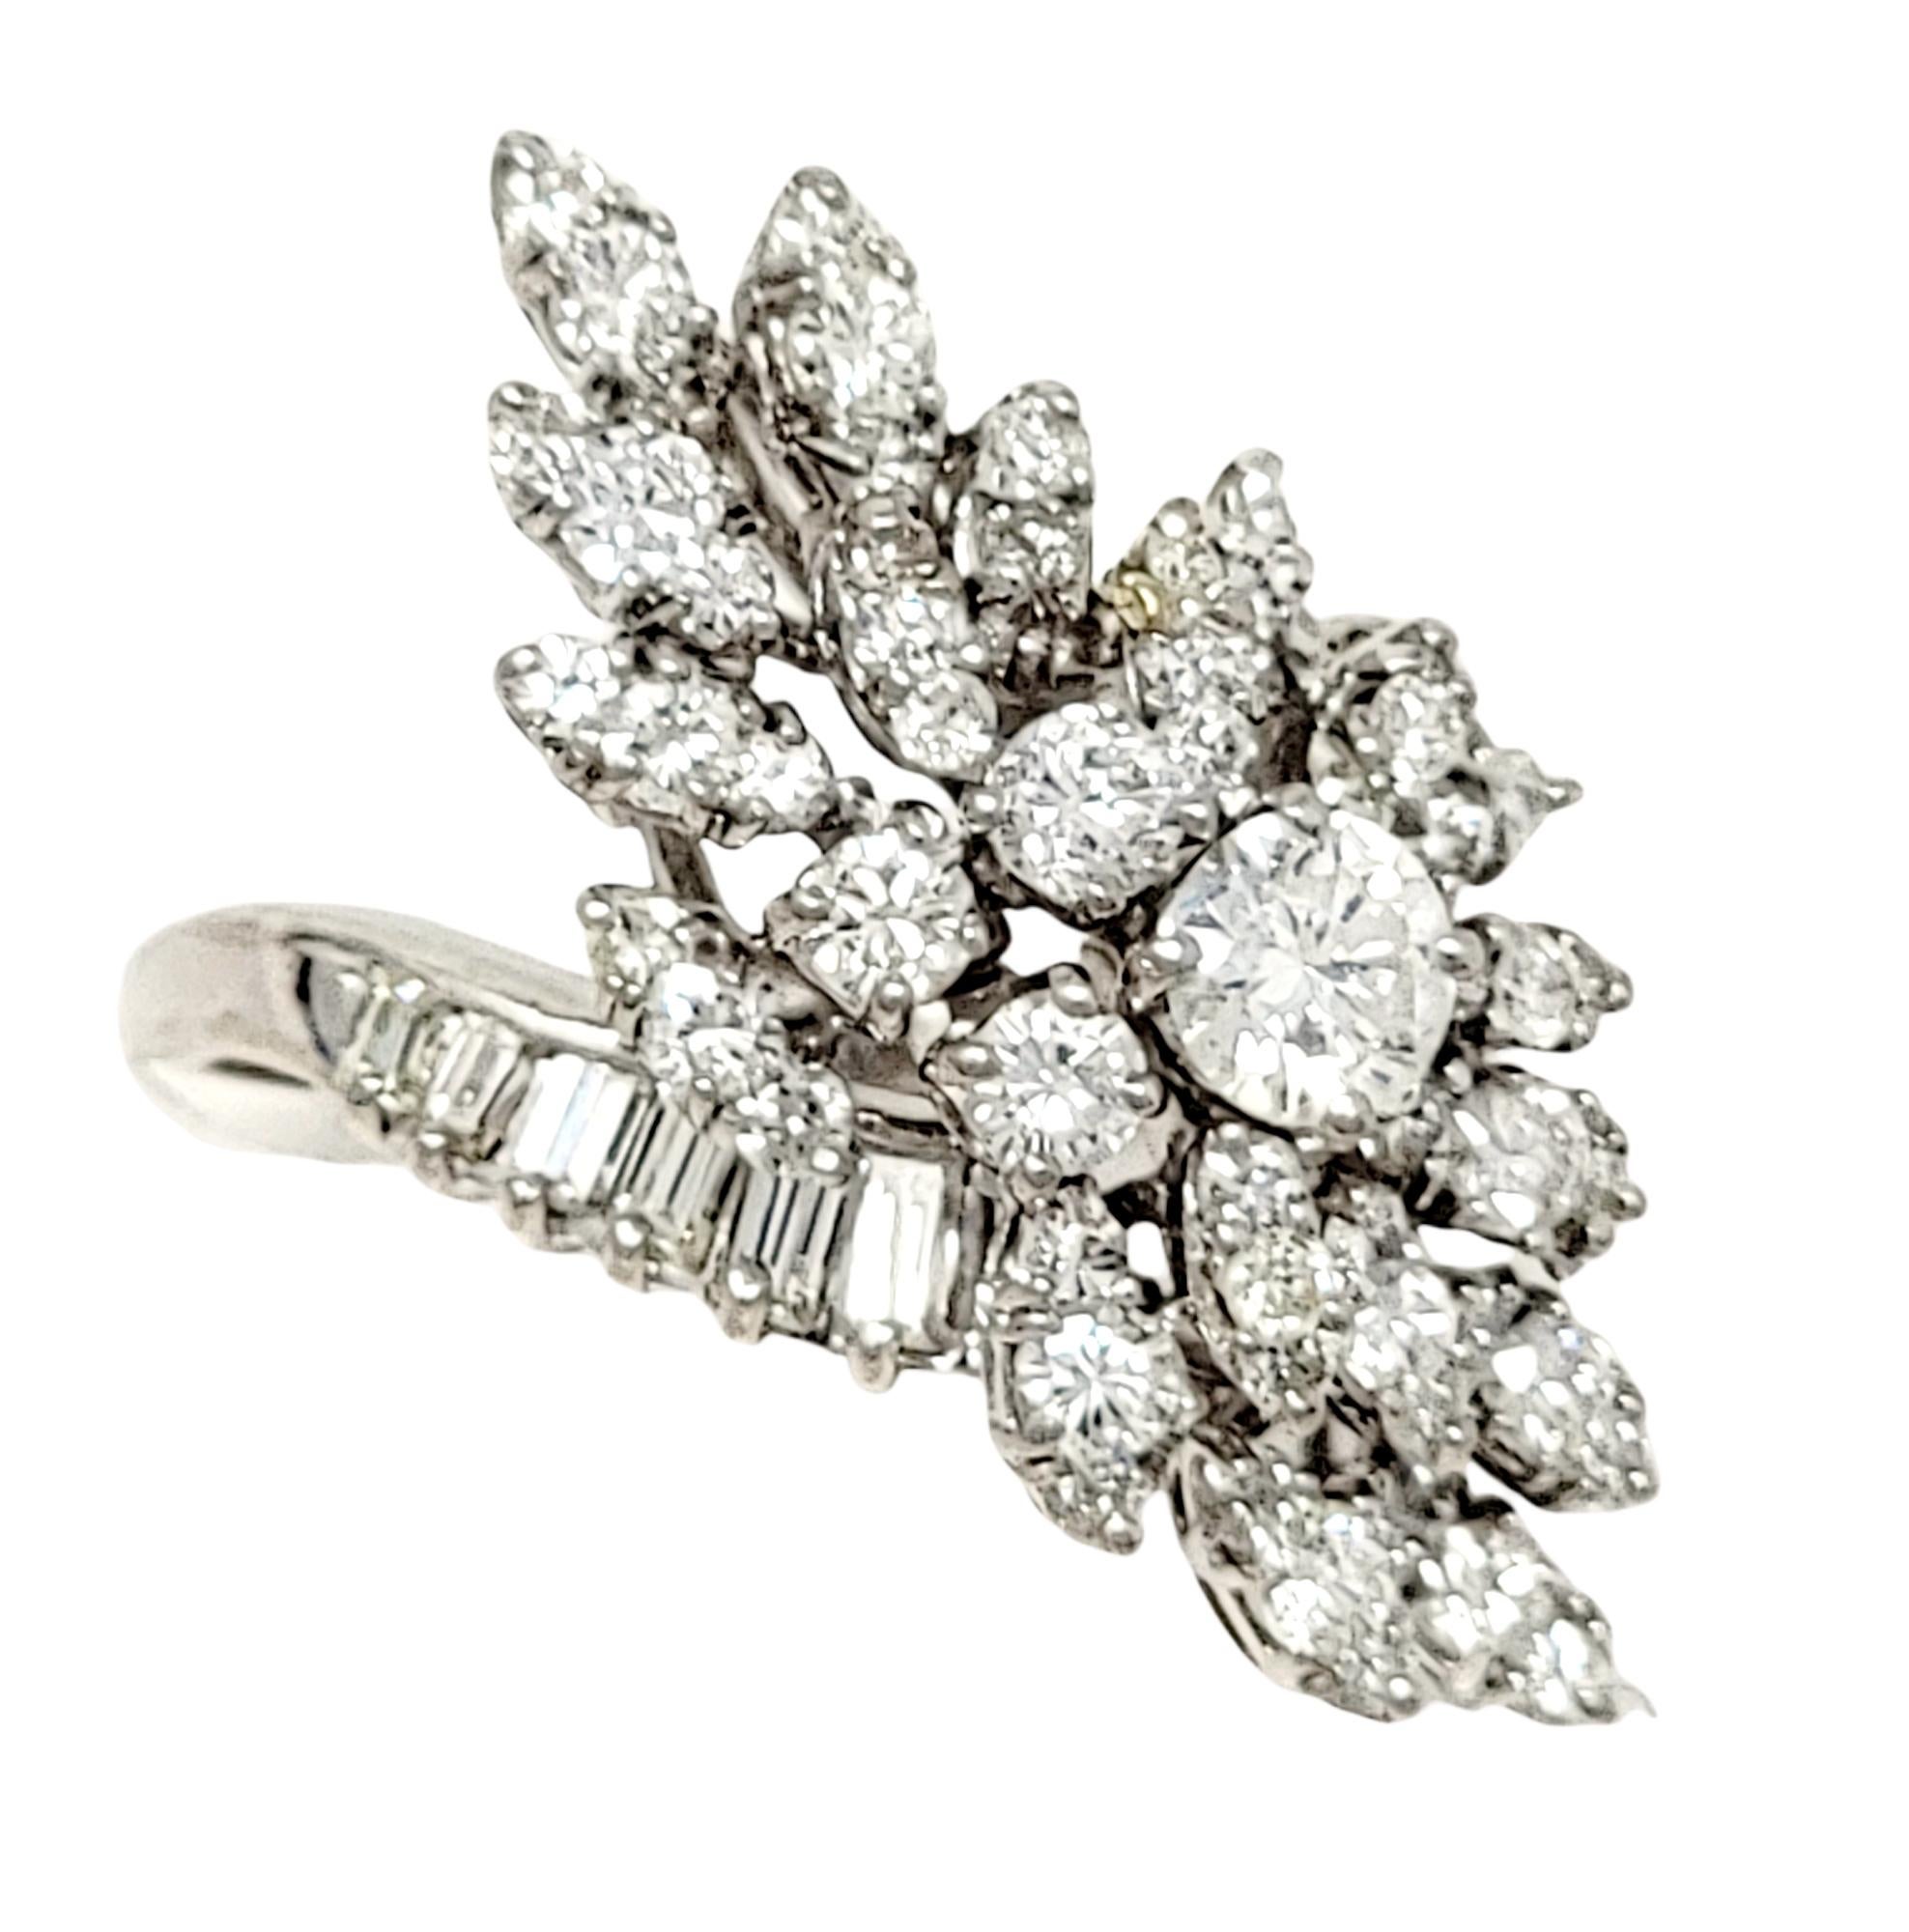 Ring size: 6

Unique diamond cluster ring with diagonal layout. This gorgeous piece fills the finger with sparkle from end to end and shimmers beautifully in the light. The white gold setting makes the already stunning diamonds appear even more